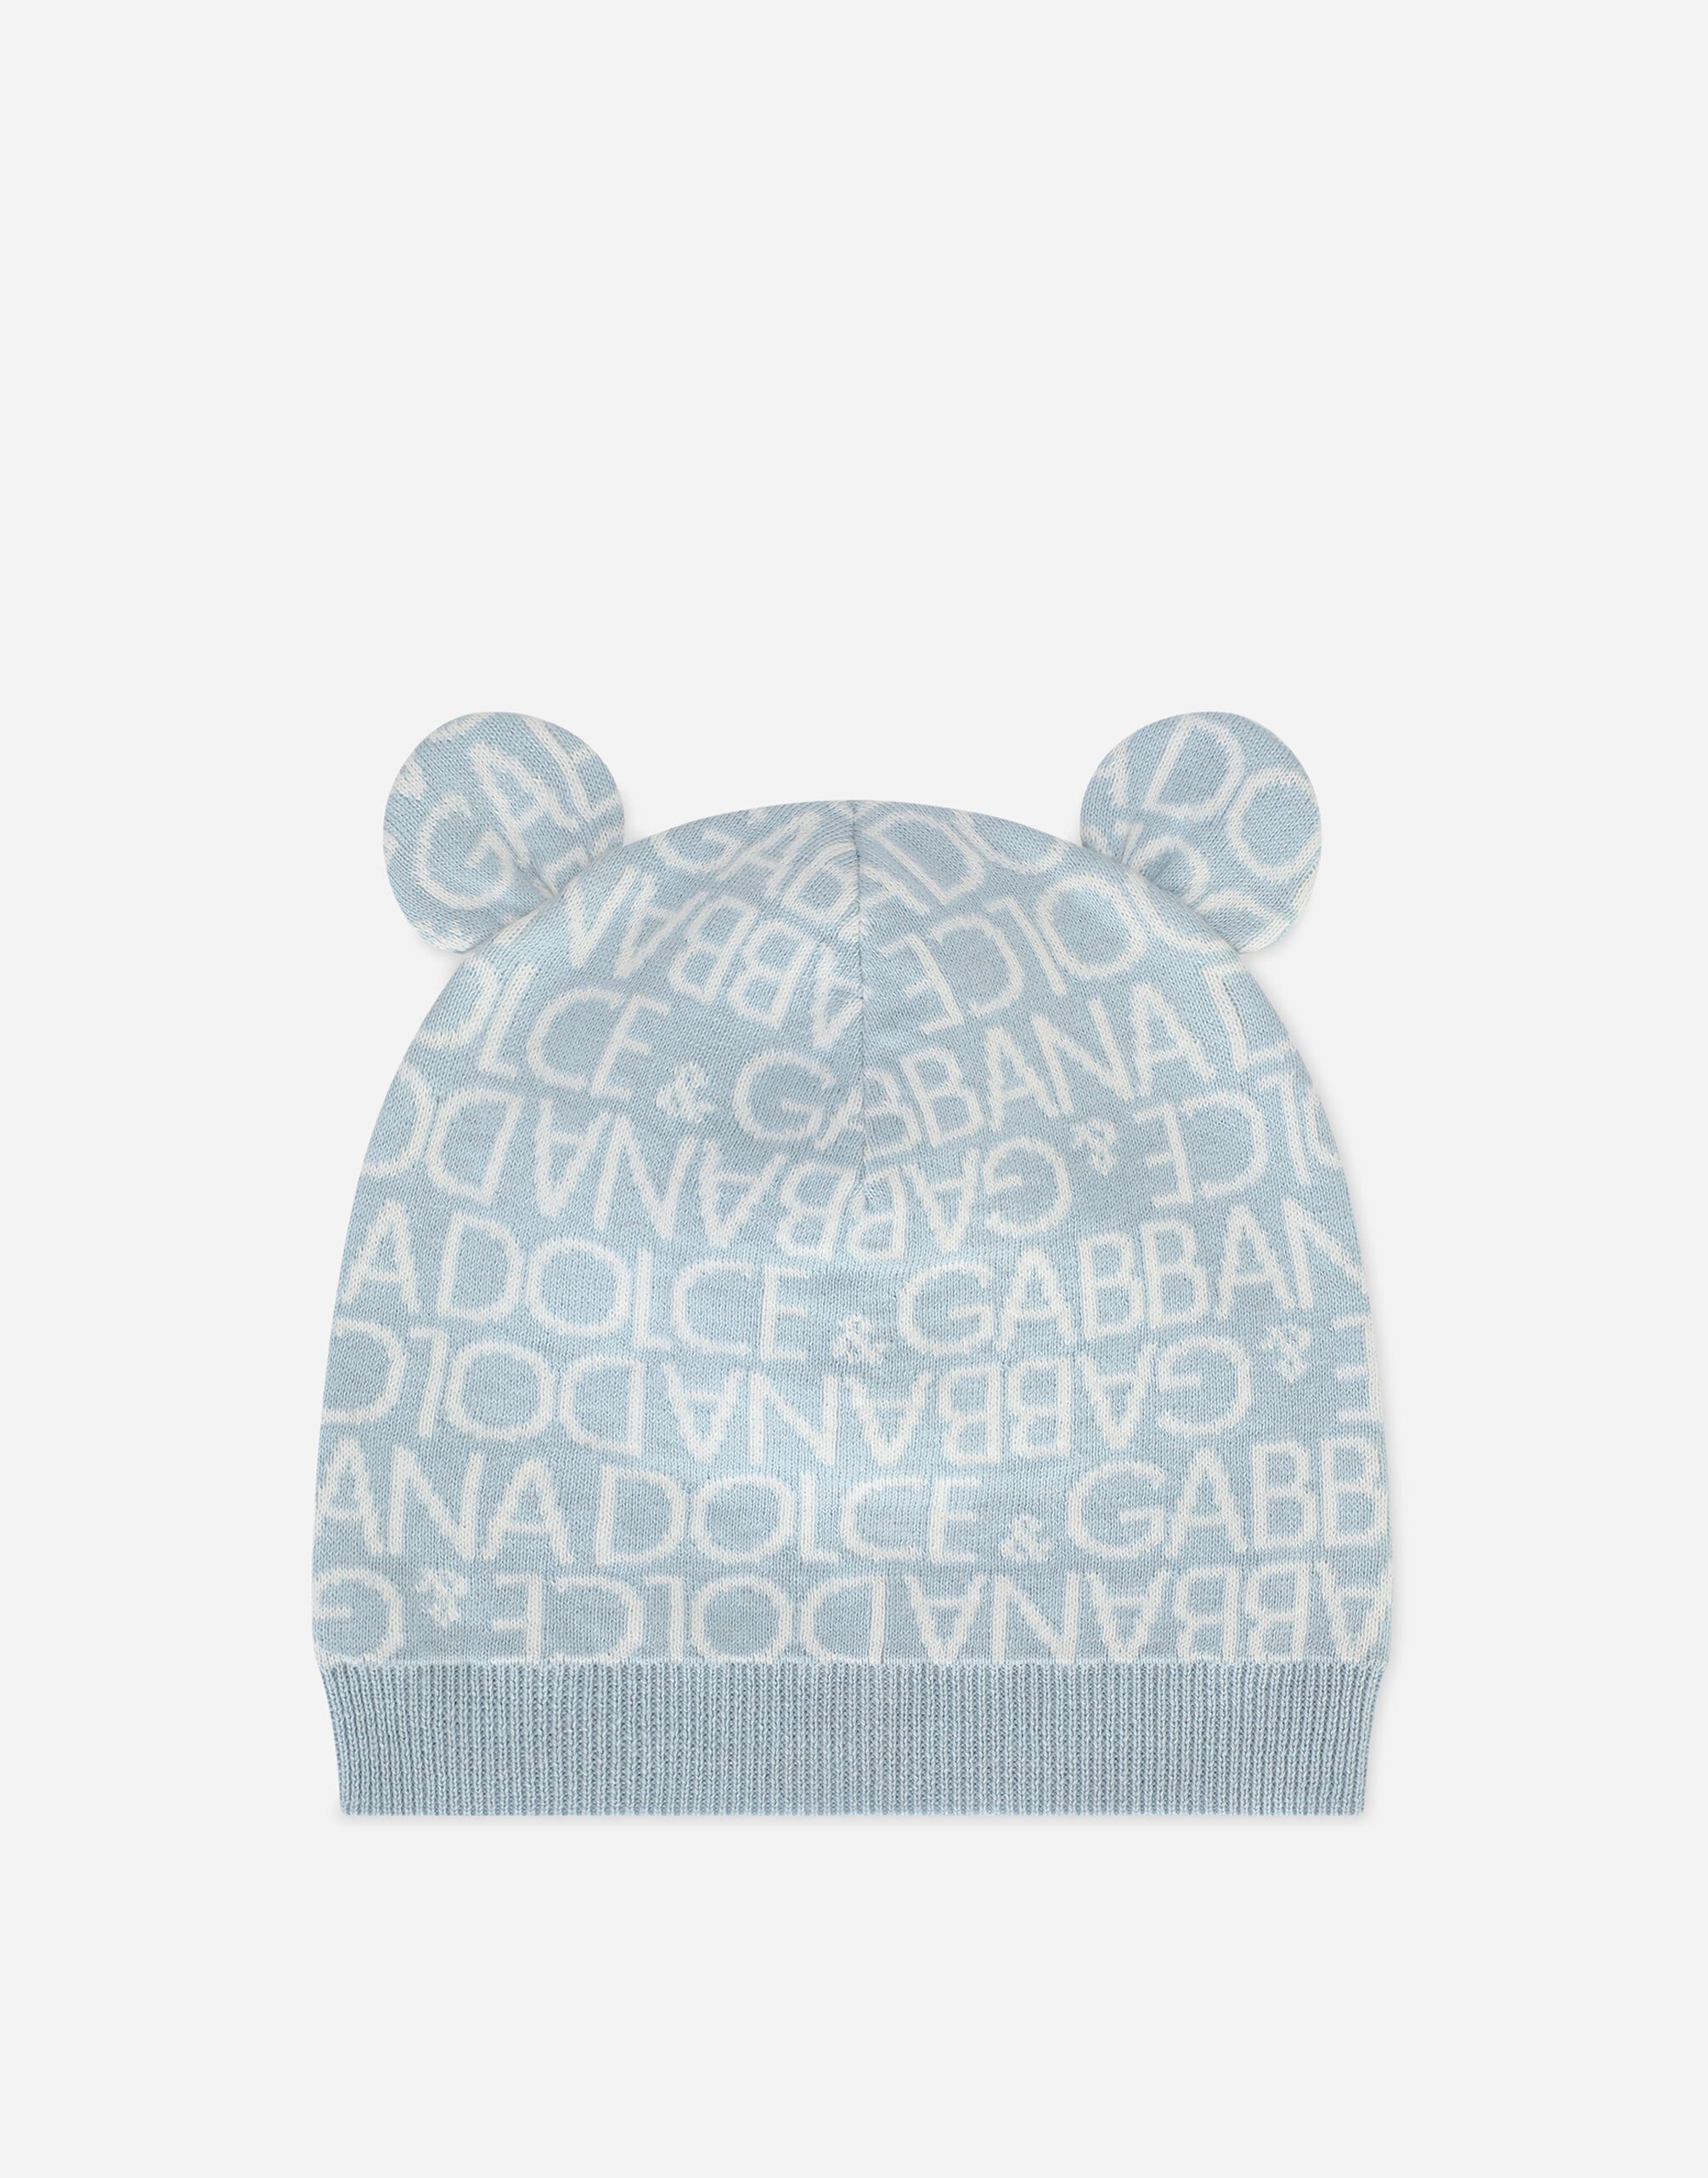 Dolce & Gabbana Knit hat with jacquard logo and ears Black EB0003AB000